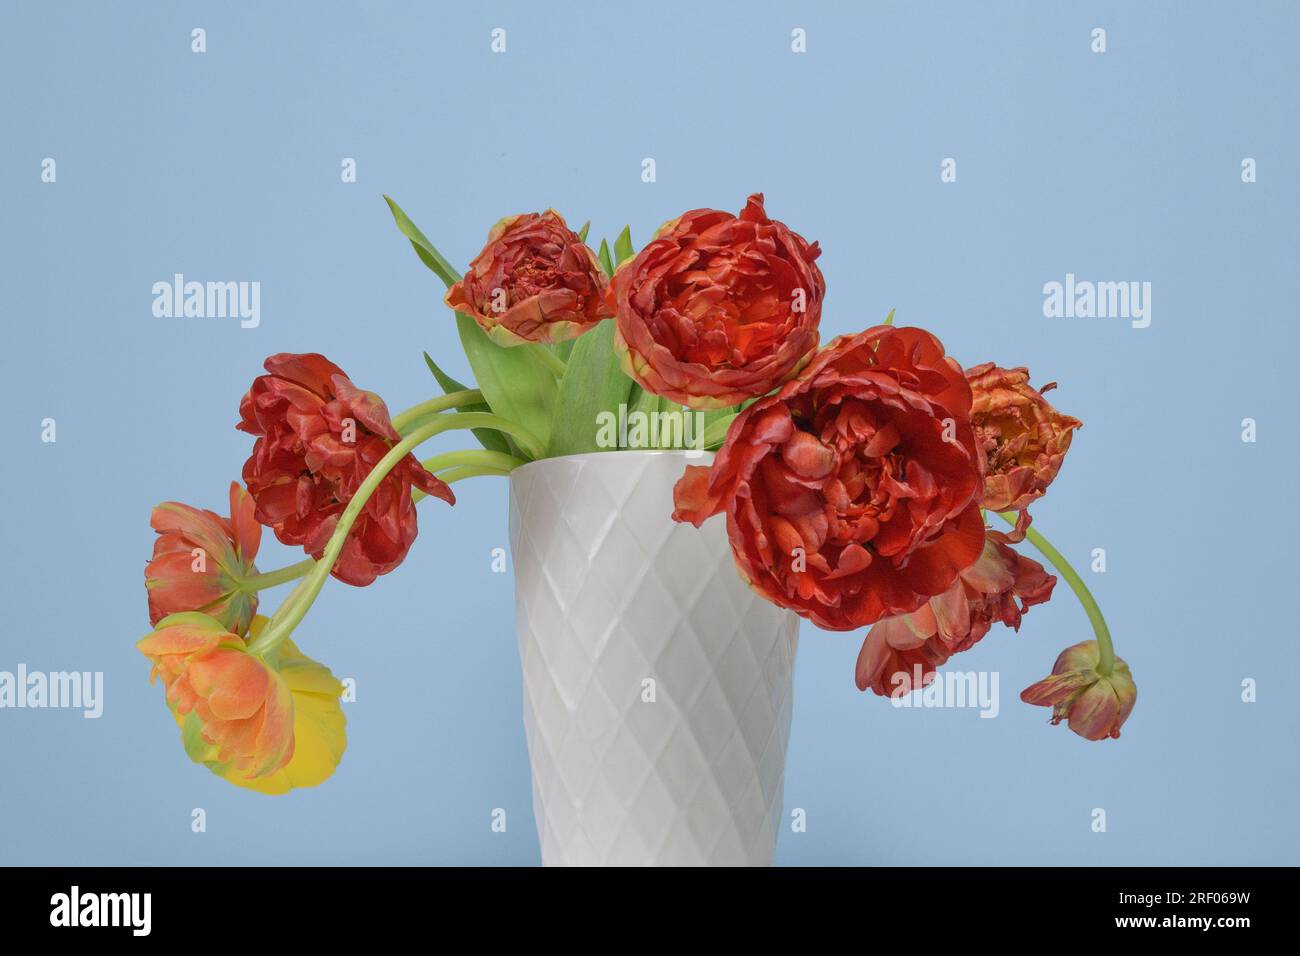 Withered yellow and red peonies in a white ceramic vase on a light blue background Stock Photo